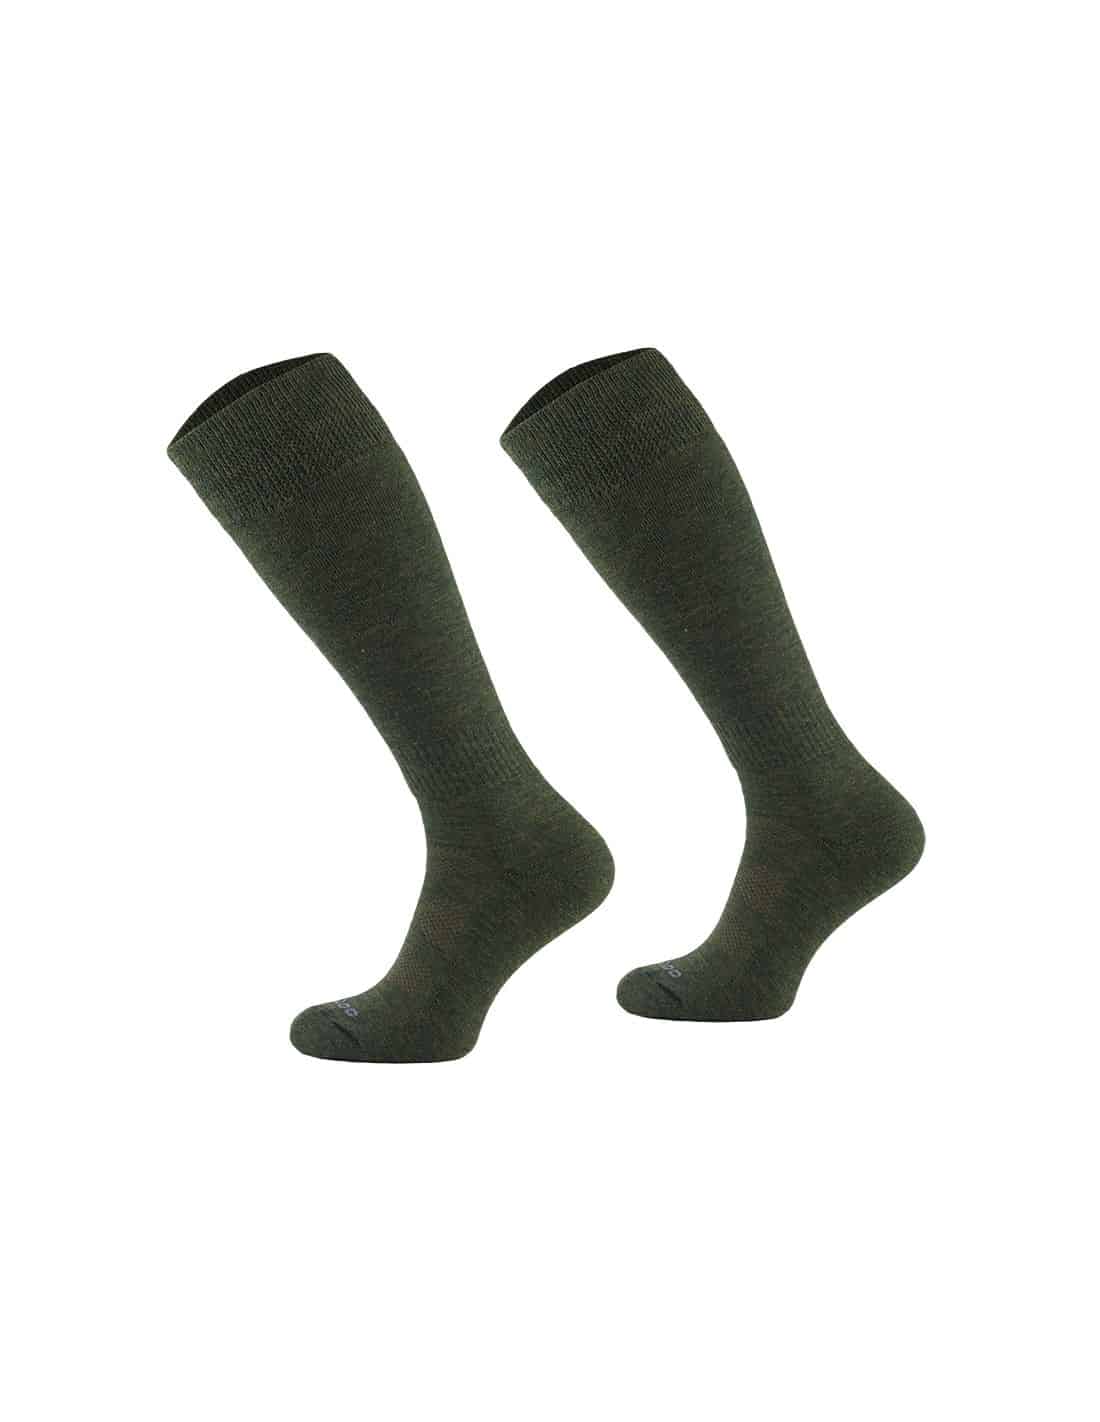 Dr Hunter Homme Laine Merinos Basses Anti Transpiration Chaussettes pour  Chasse